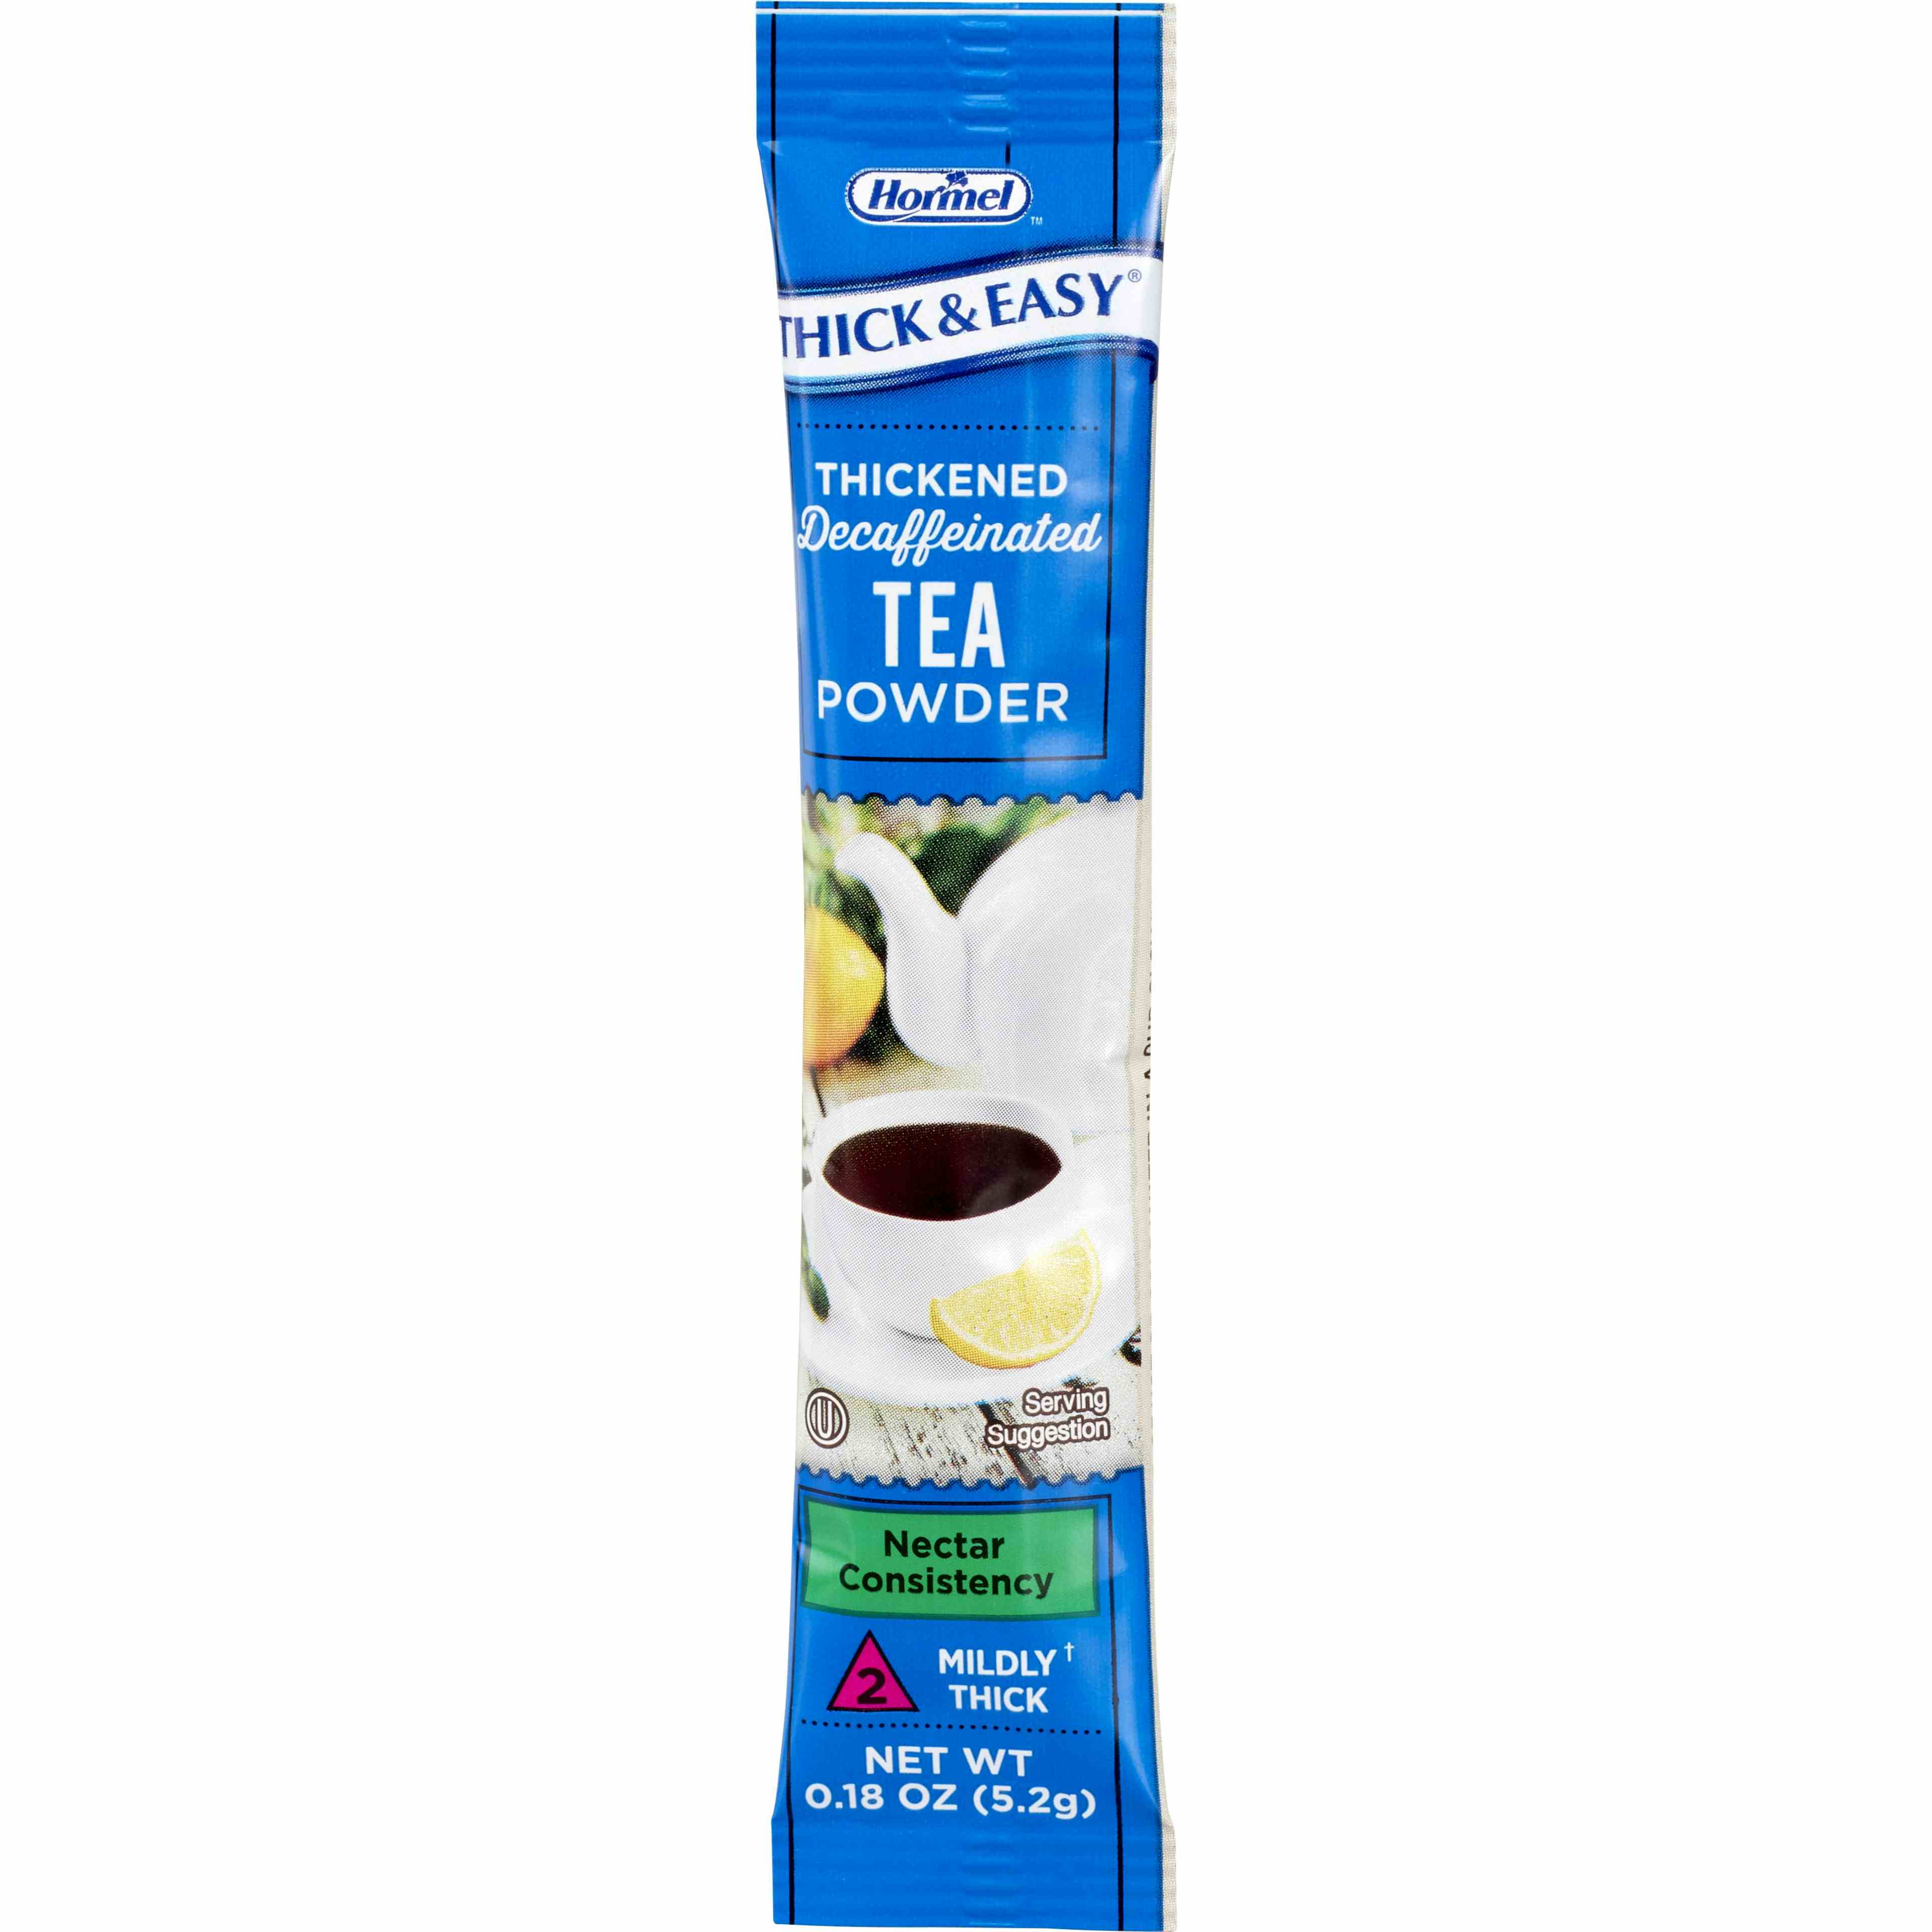 Thick & Easy Decaffeinated Tea Nectar Consistency Thickened Beverage, 0.18 oz. Packet of Powder, 81330, Case of 72